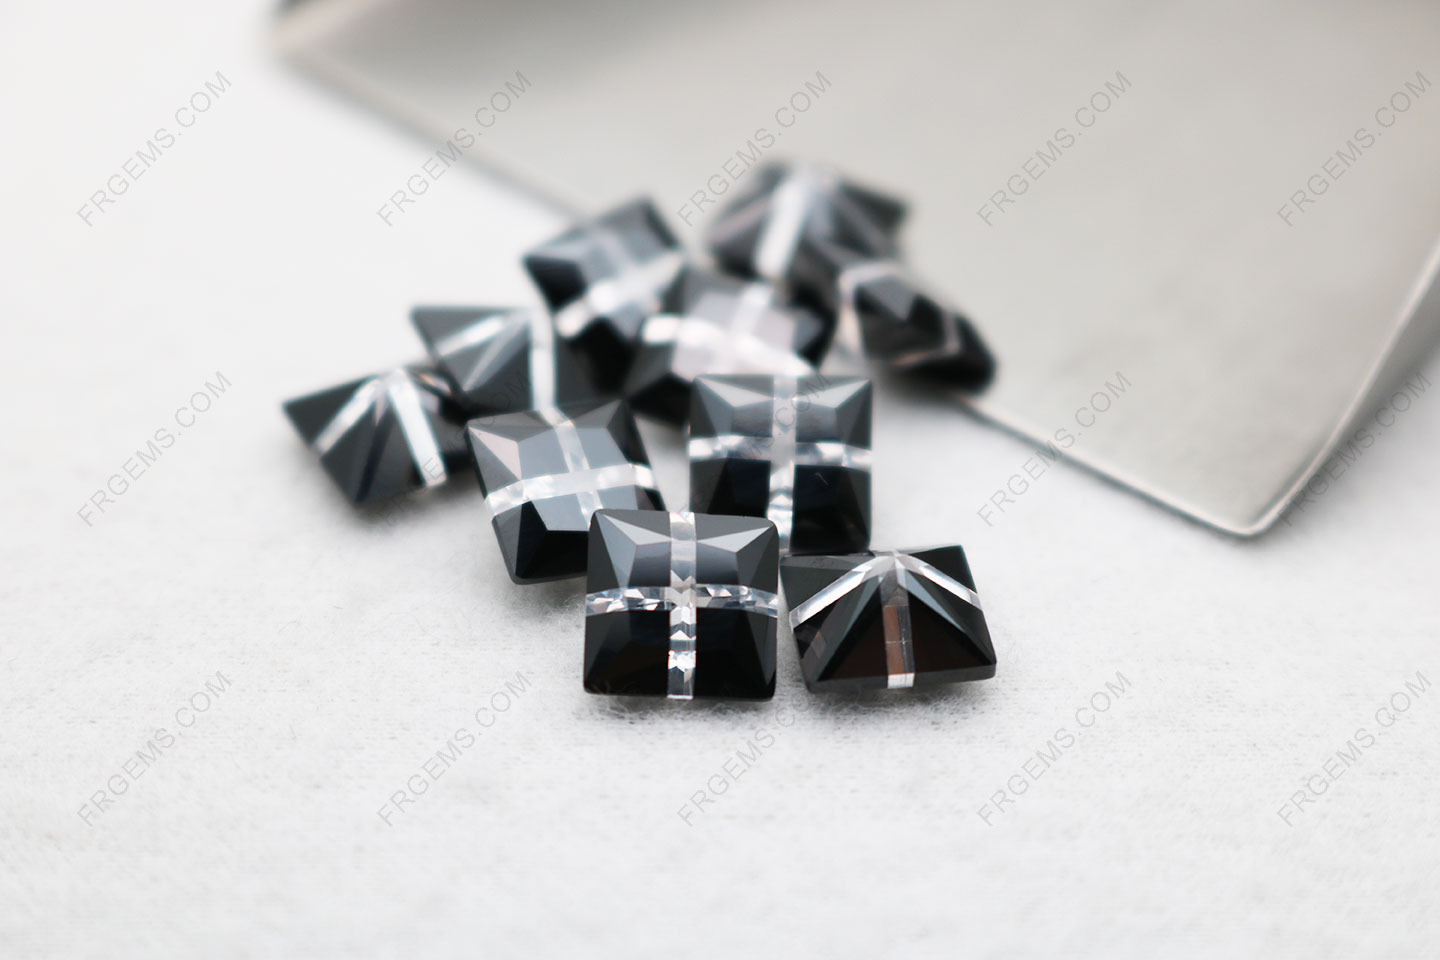 White and Black Mixed colored Cubic Zirconia Color Square shaped Gemstones